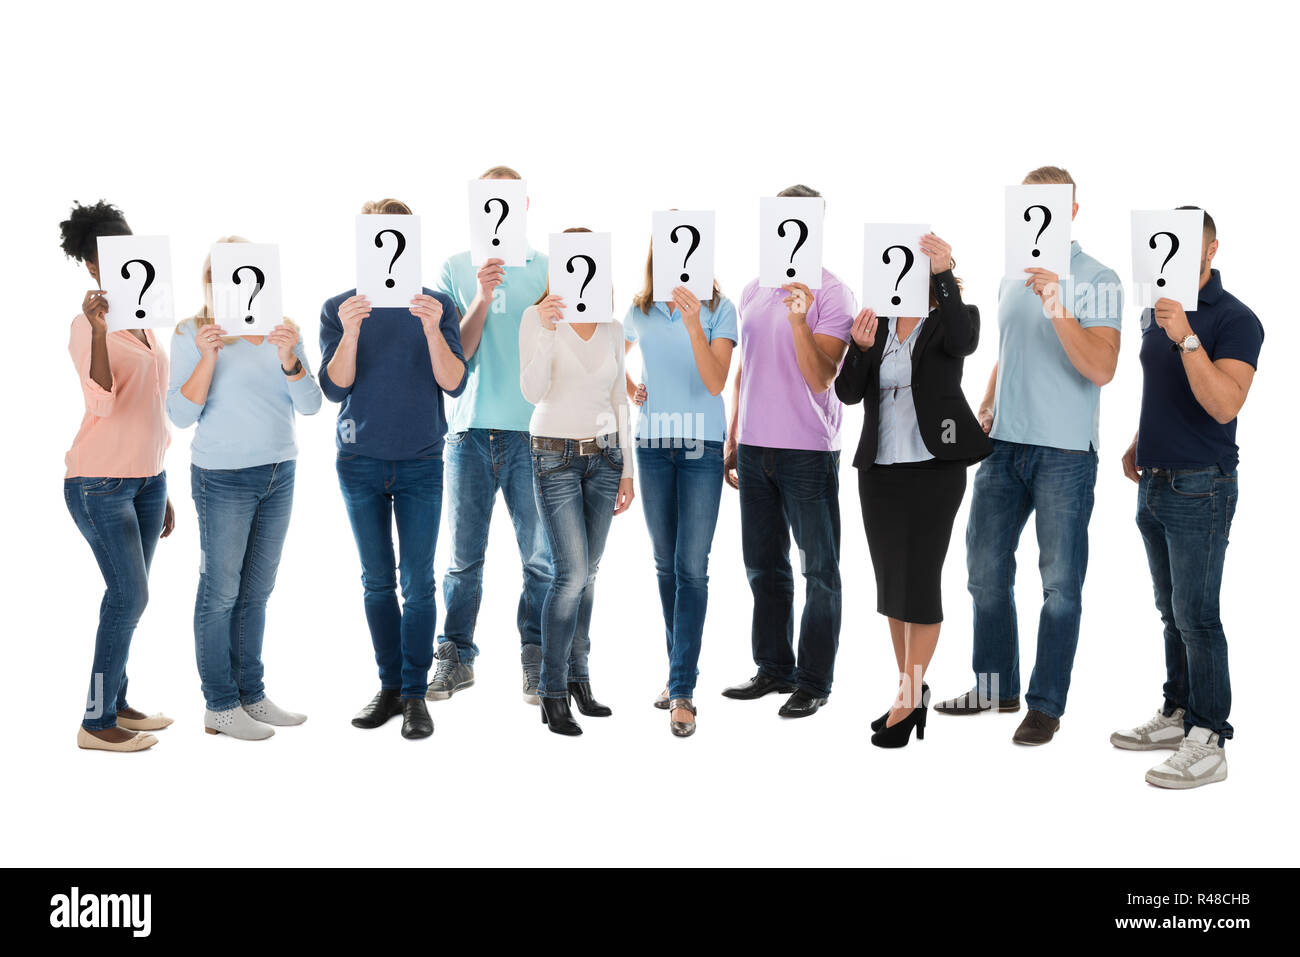 Creative Business Team Hiding Faces With Question Mark Signs Stock Photo